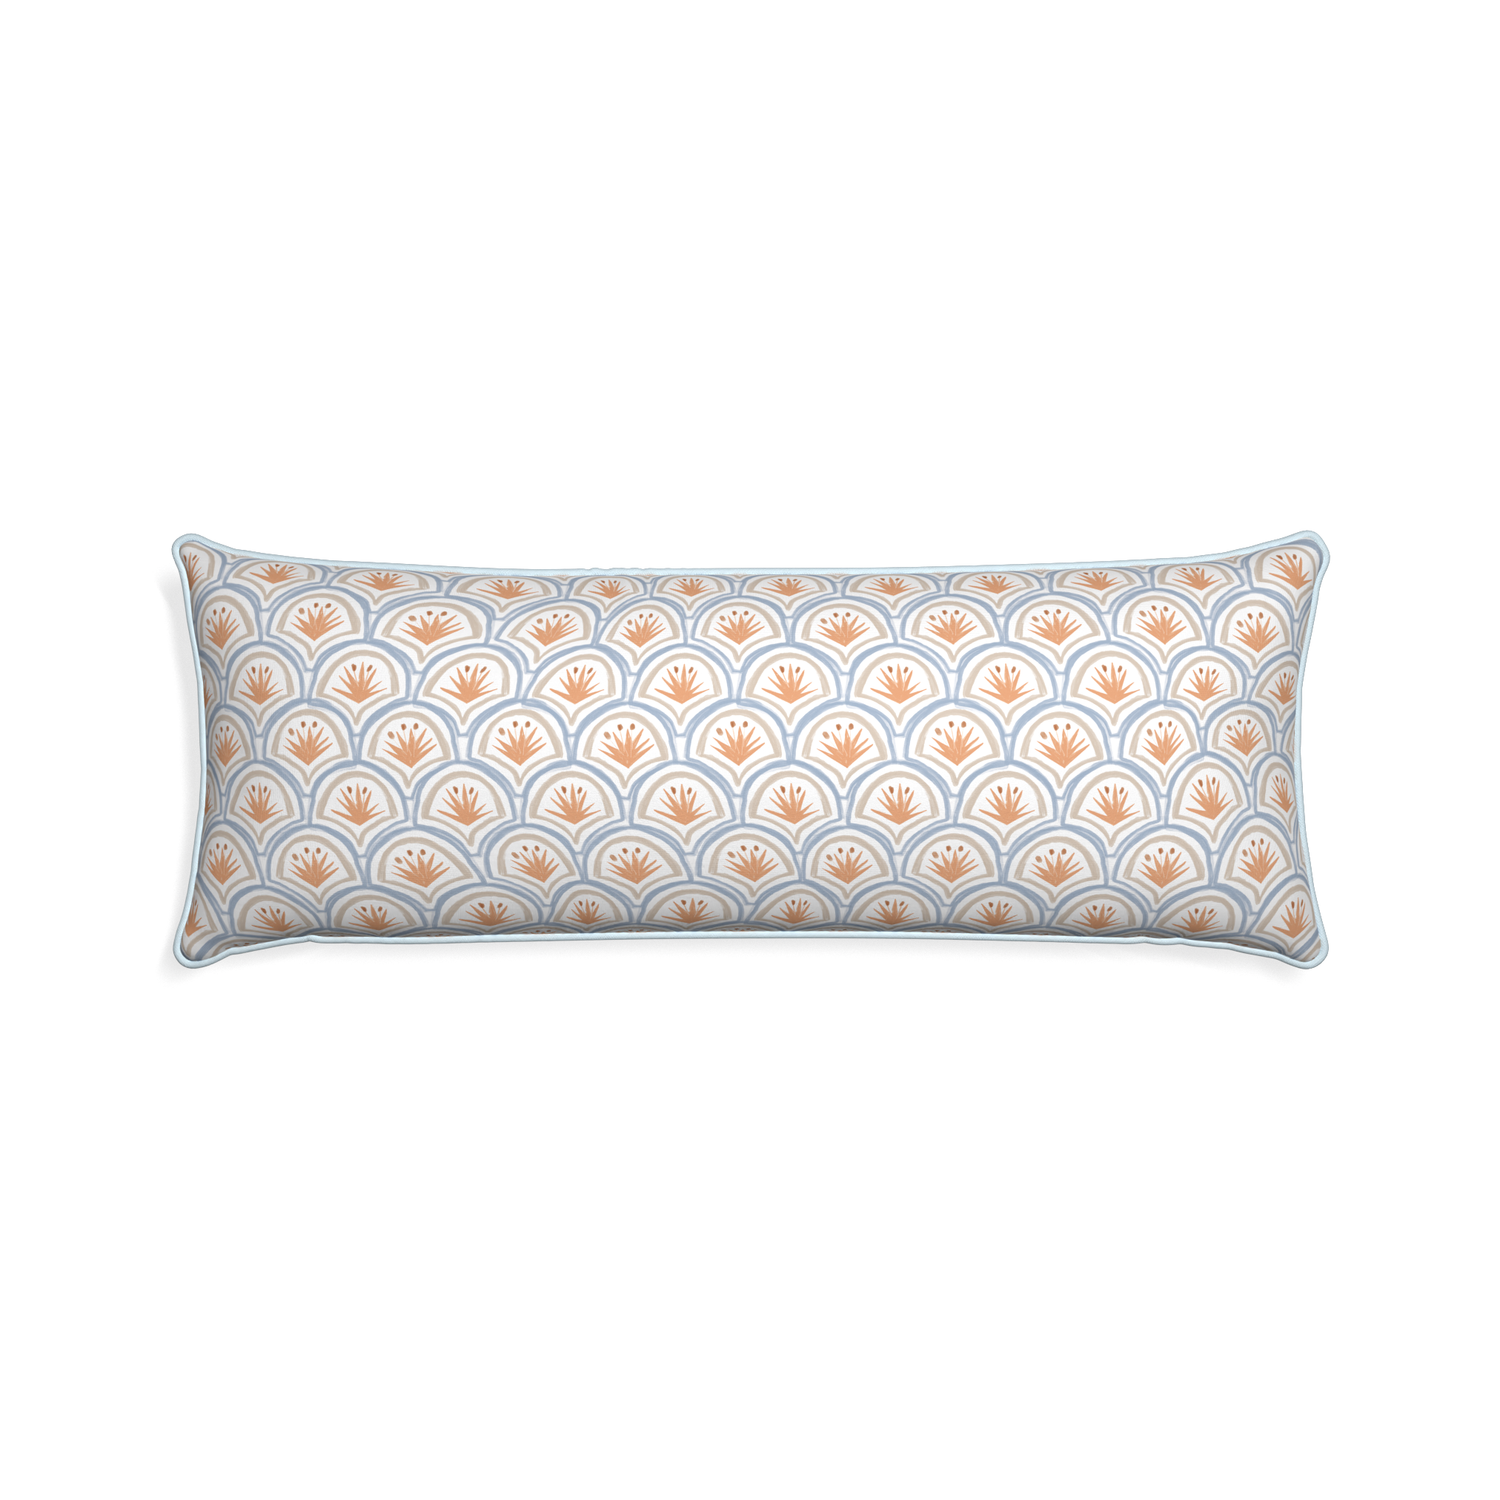 Xl-lumbar thatcher apricot custom art deco palm patternpillow with powder piping on white background